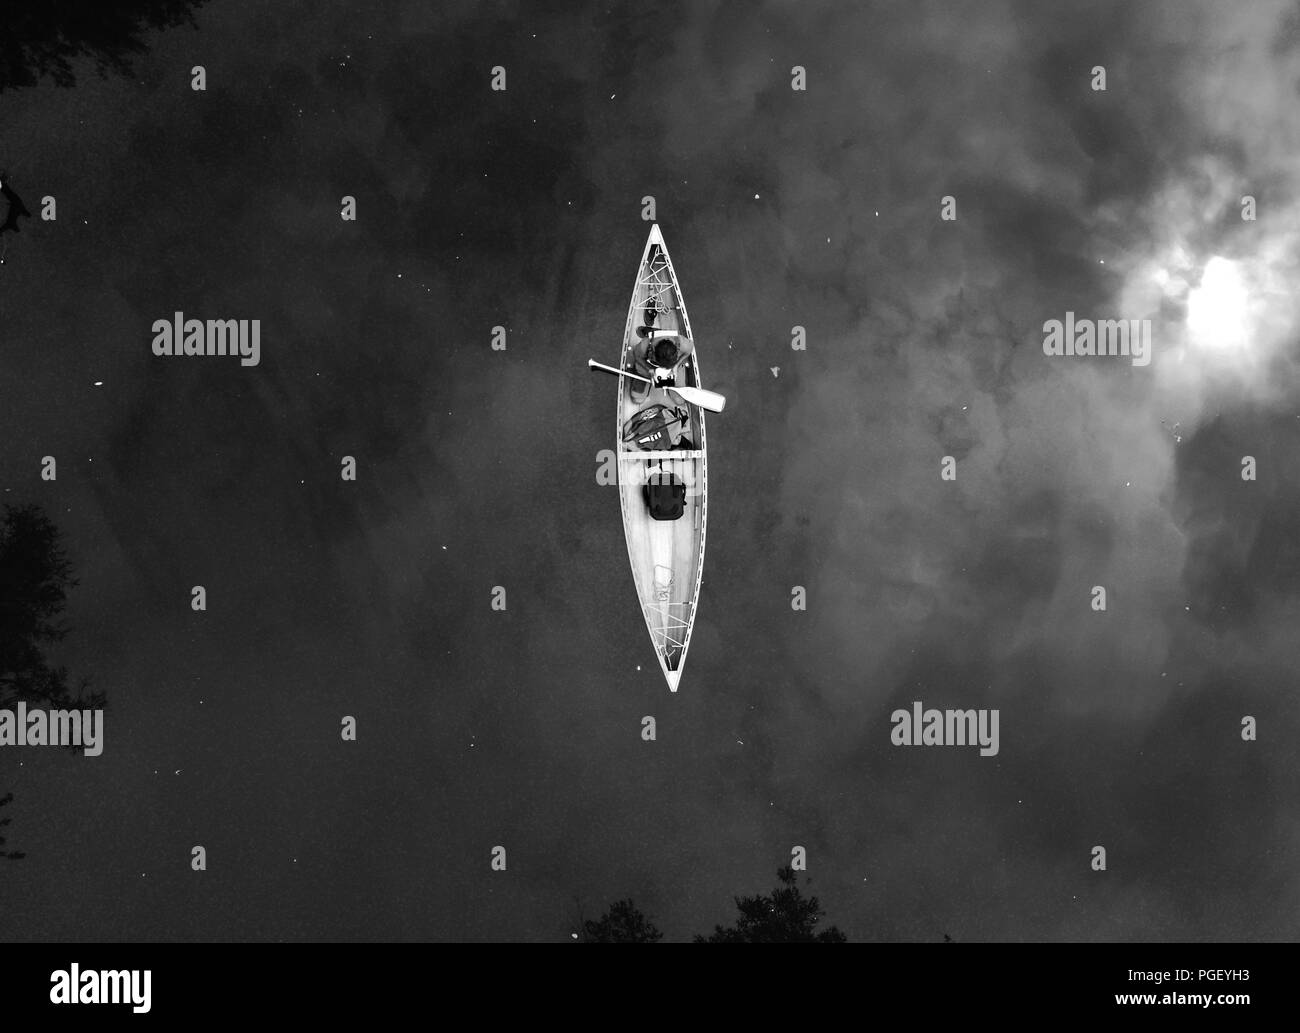 drone shot looking down on a man in a canadian canoe floating on a river in black and white Stock Photo